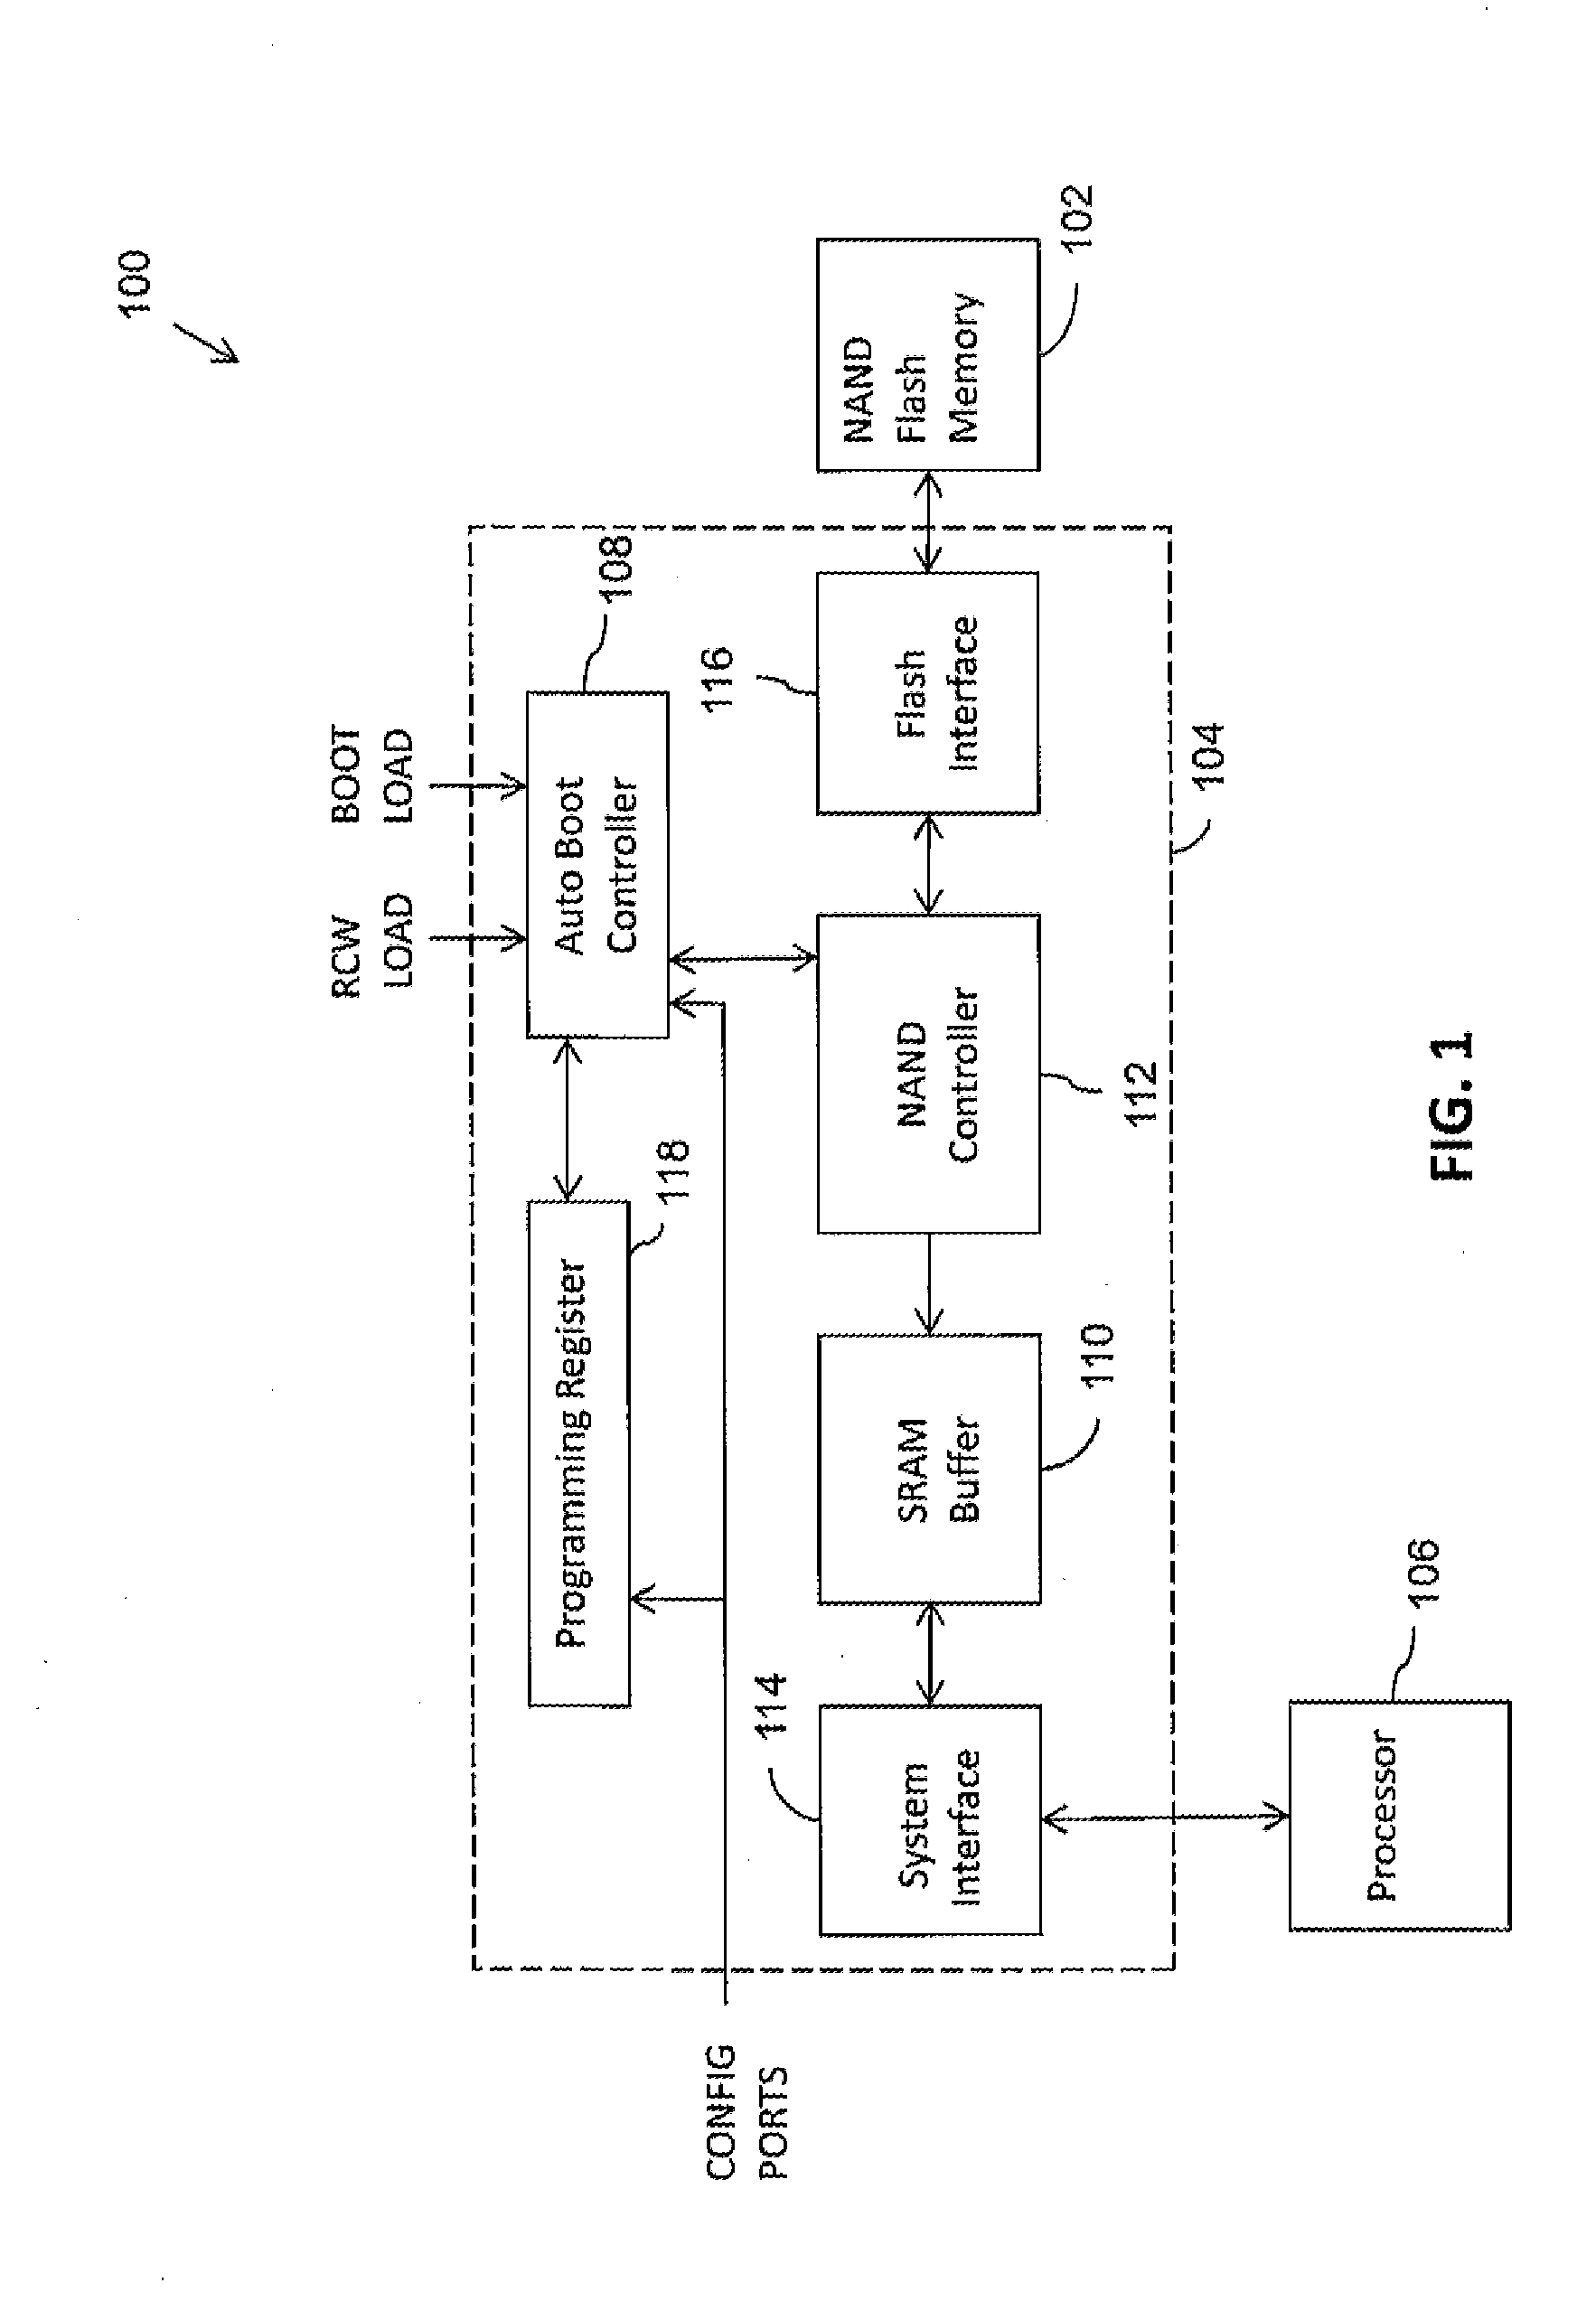 Method and system for booting electronic device from NAND flash memory